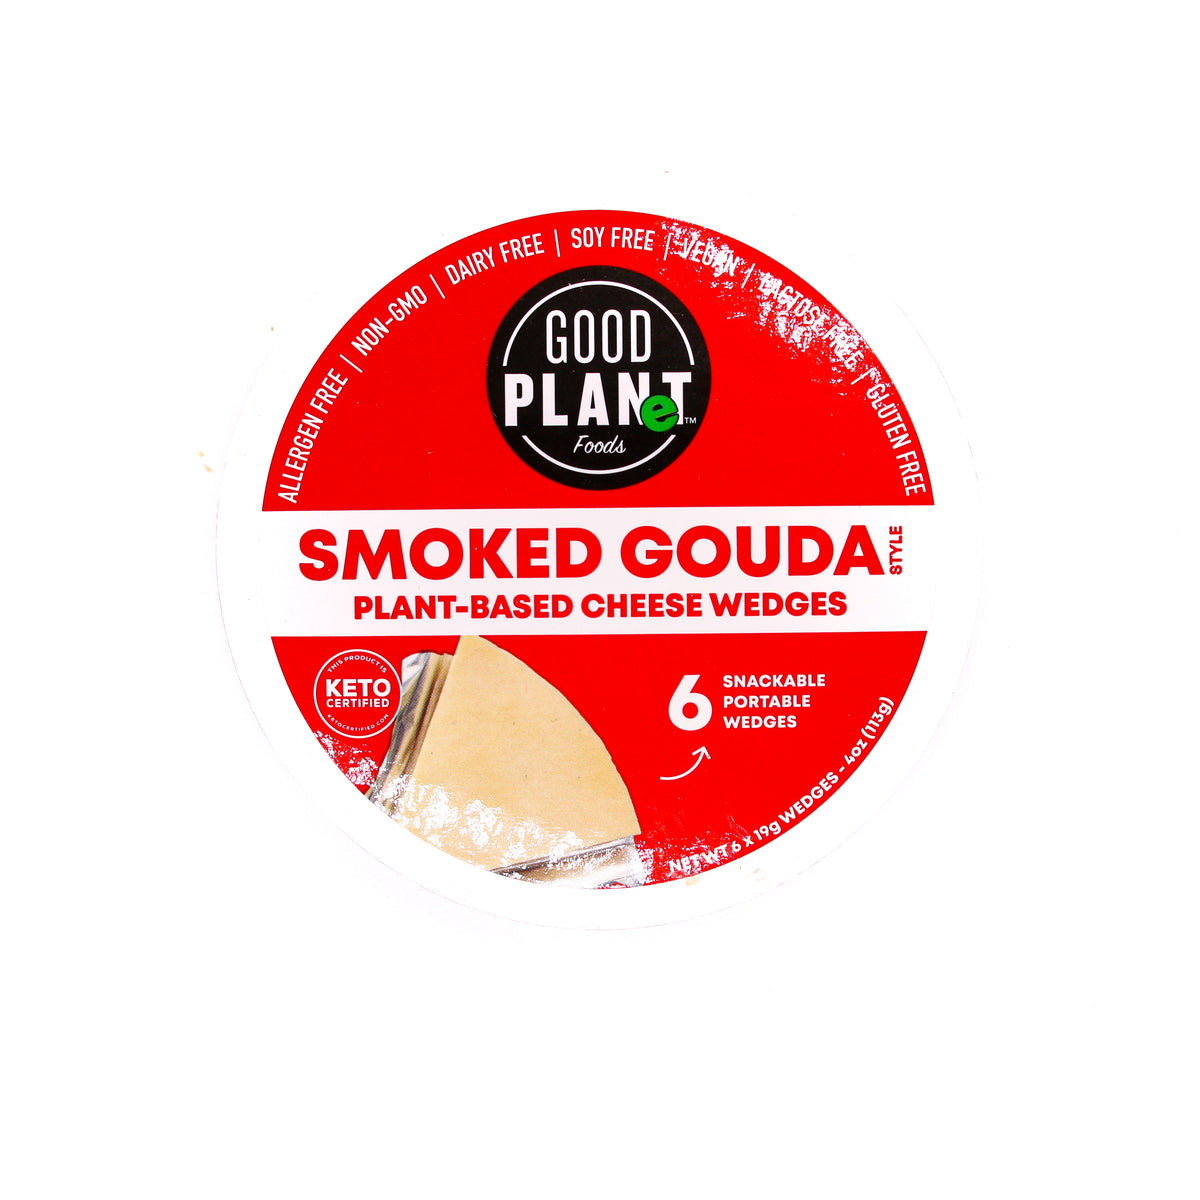 Good Planet Wedges Smoked Gouda is